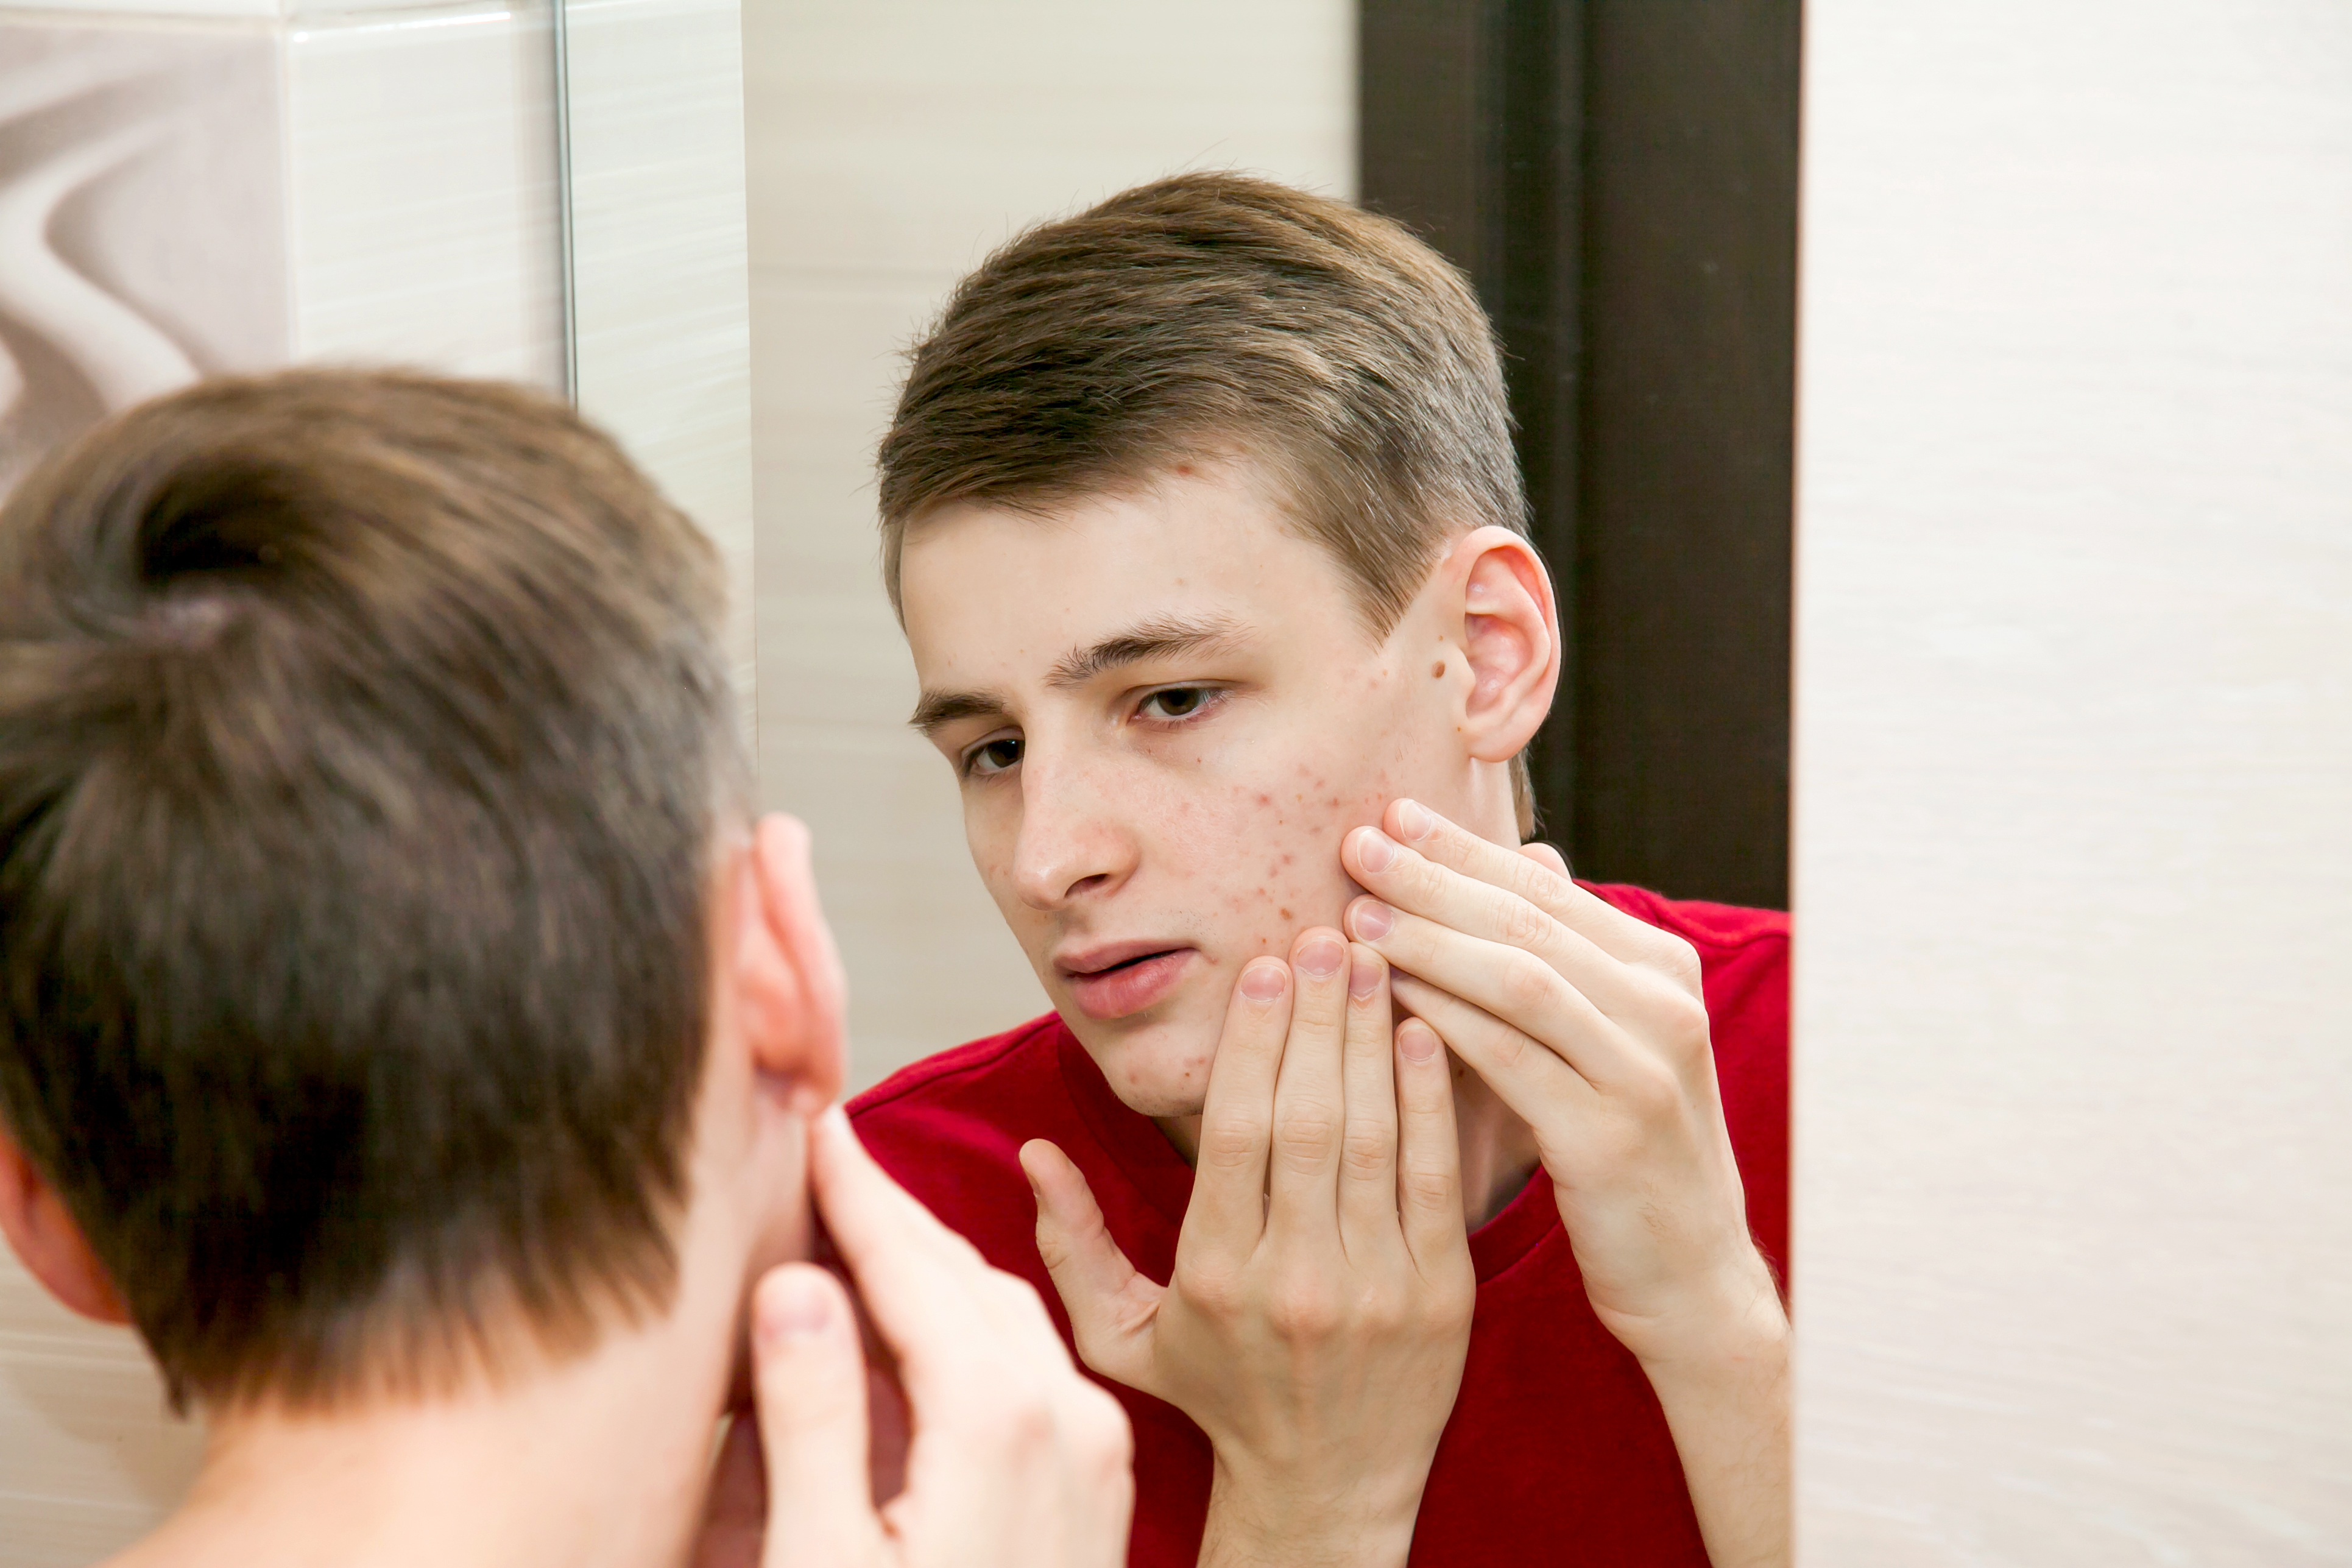 teen popping pimples in the mirror